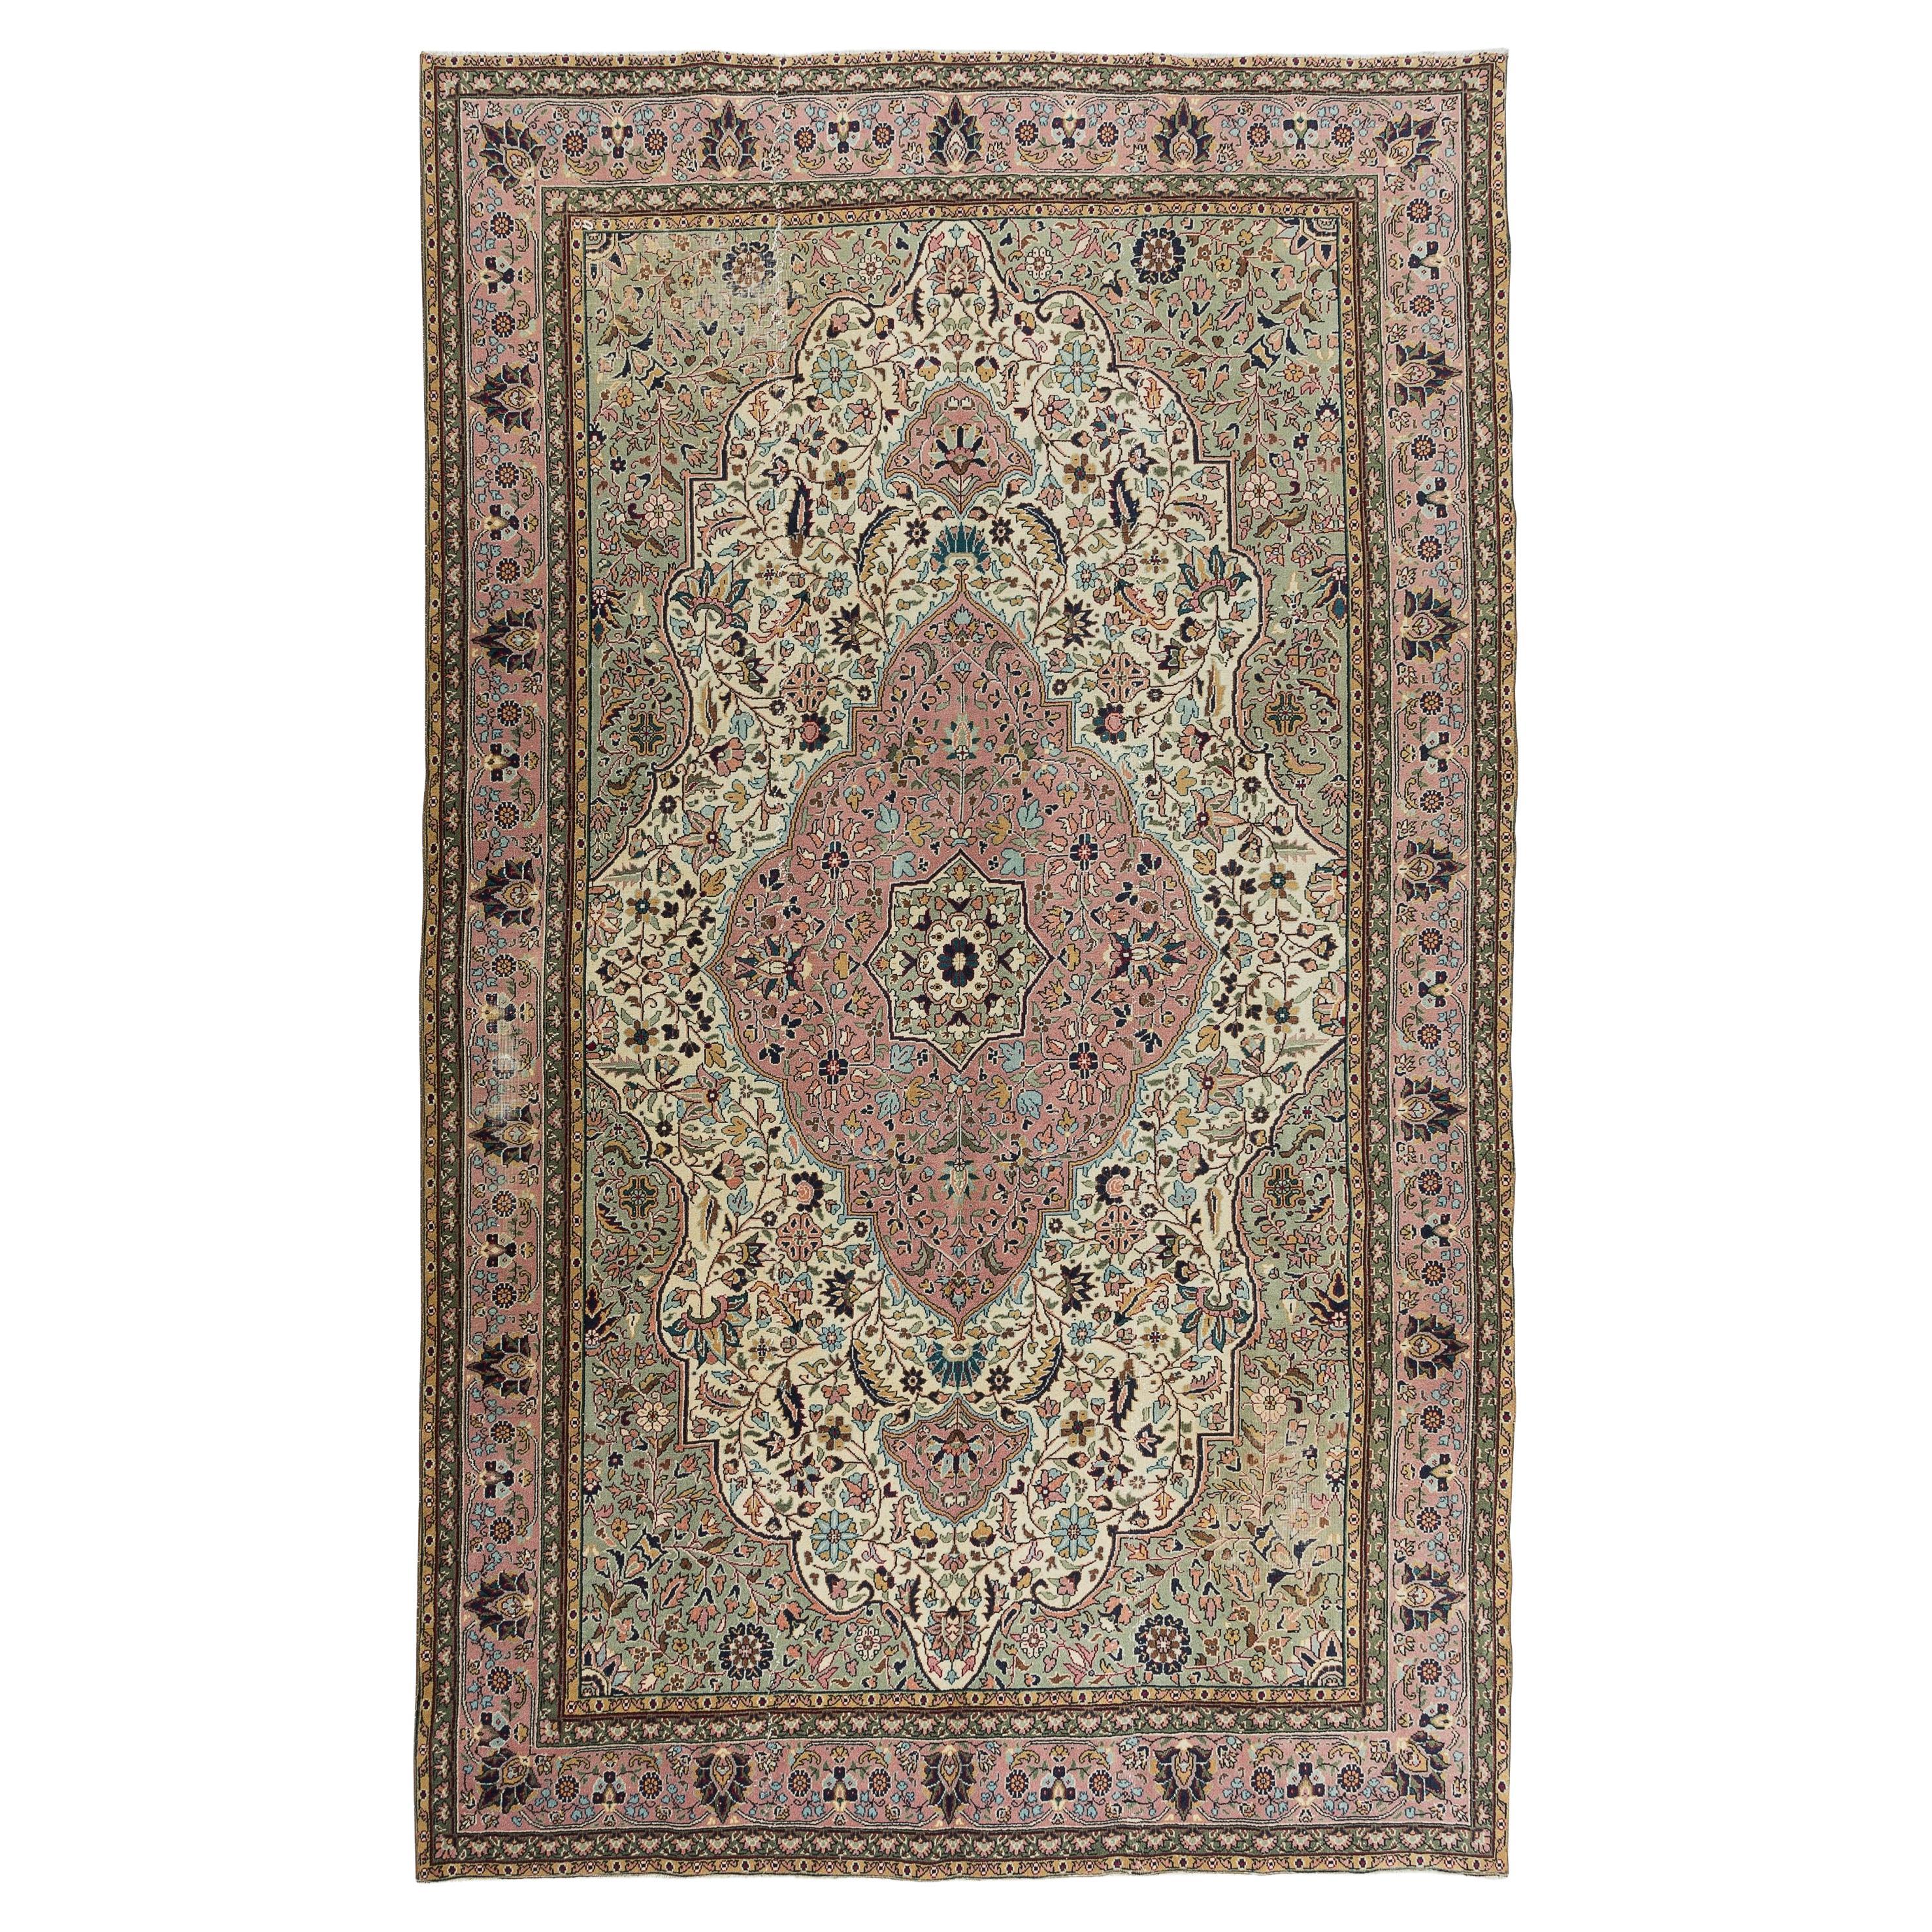 6.4x10.4 Ft One of a Pair Handmade Turkish Wool Area Rug for Living Room Decor For Sale